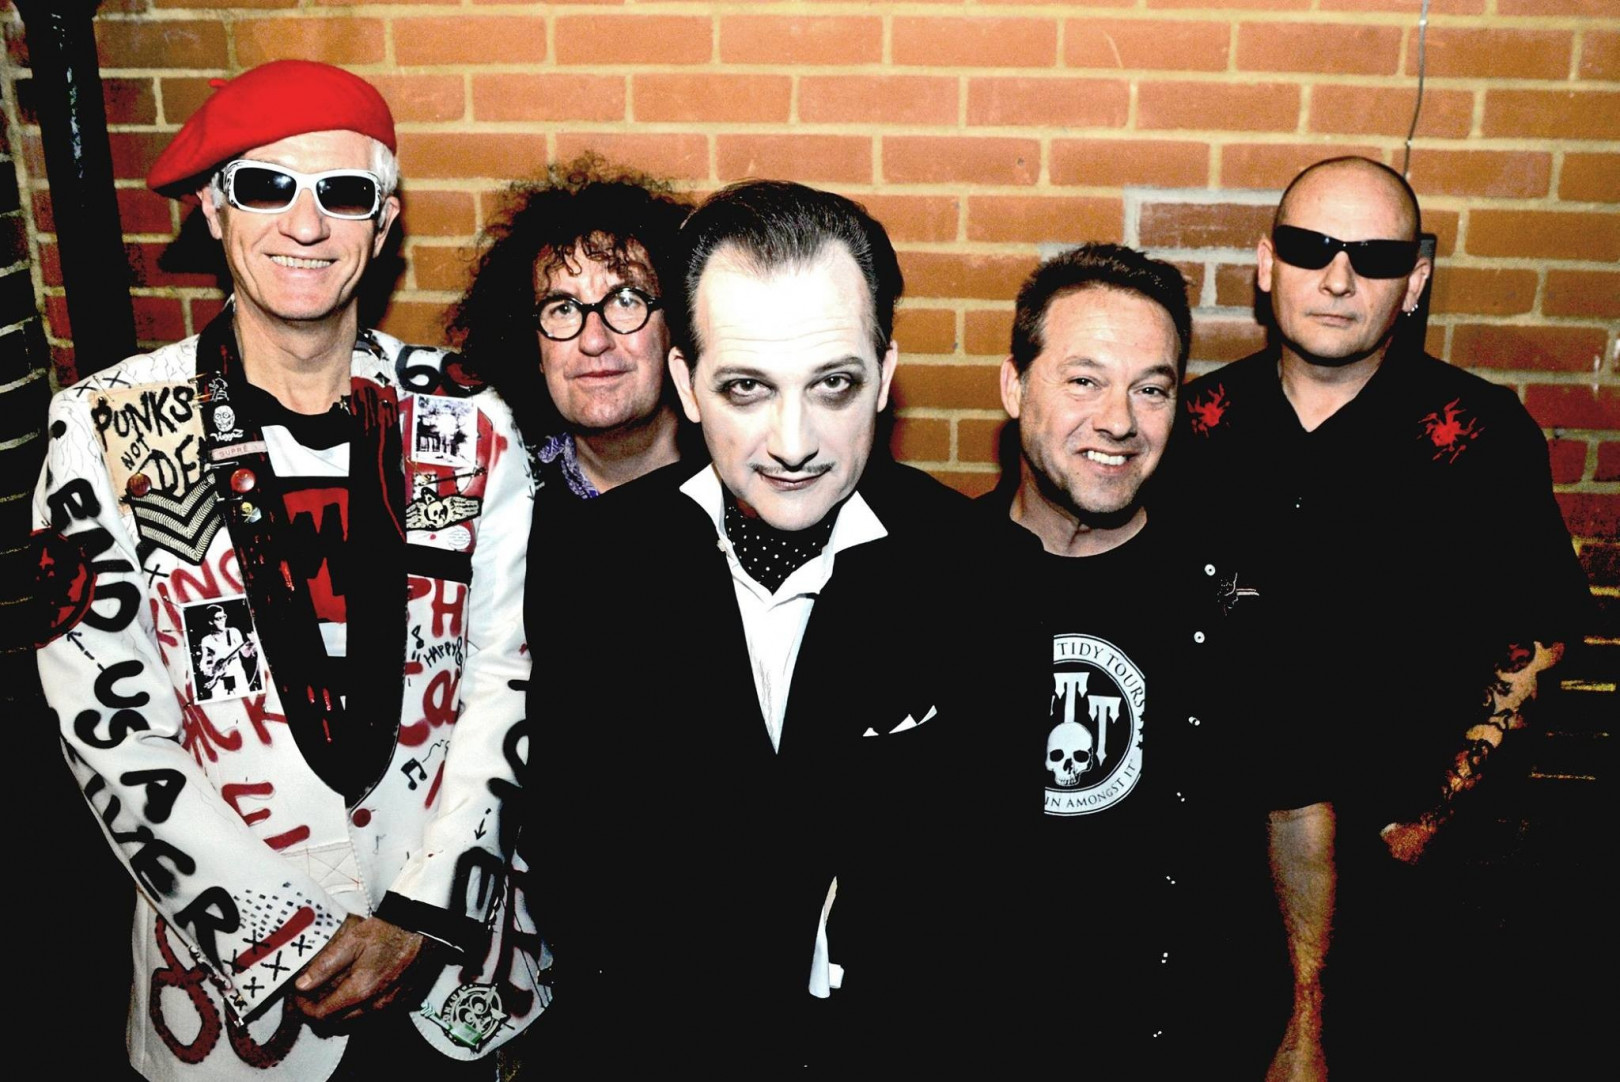 The Damned release video for “You’re Gonna Realise”